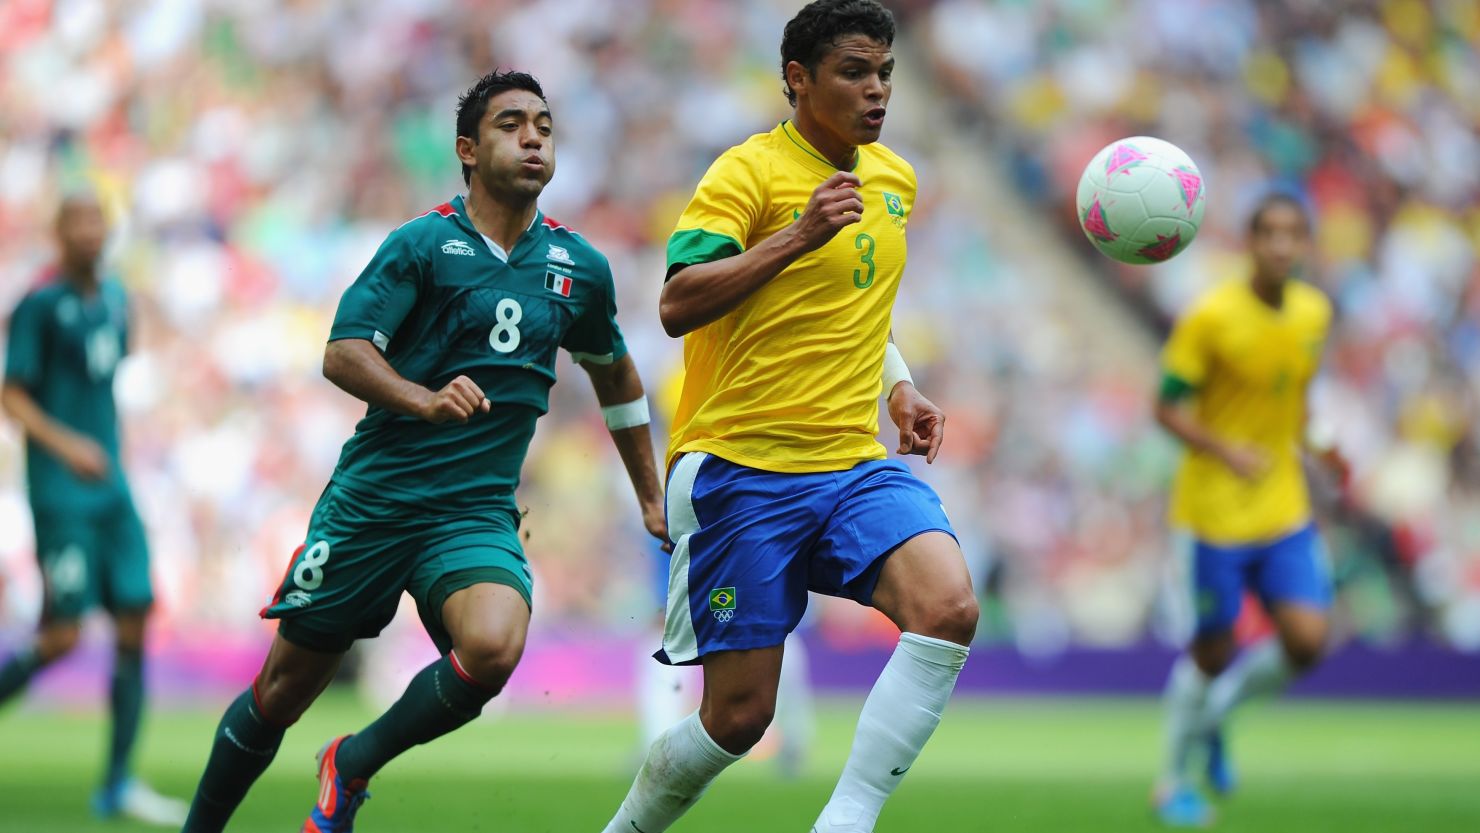 Thiago Silva was Brazil's captain against Mexico in the Olympic final at Wembley. Mexico won 2-1.